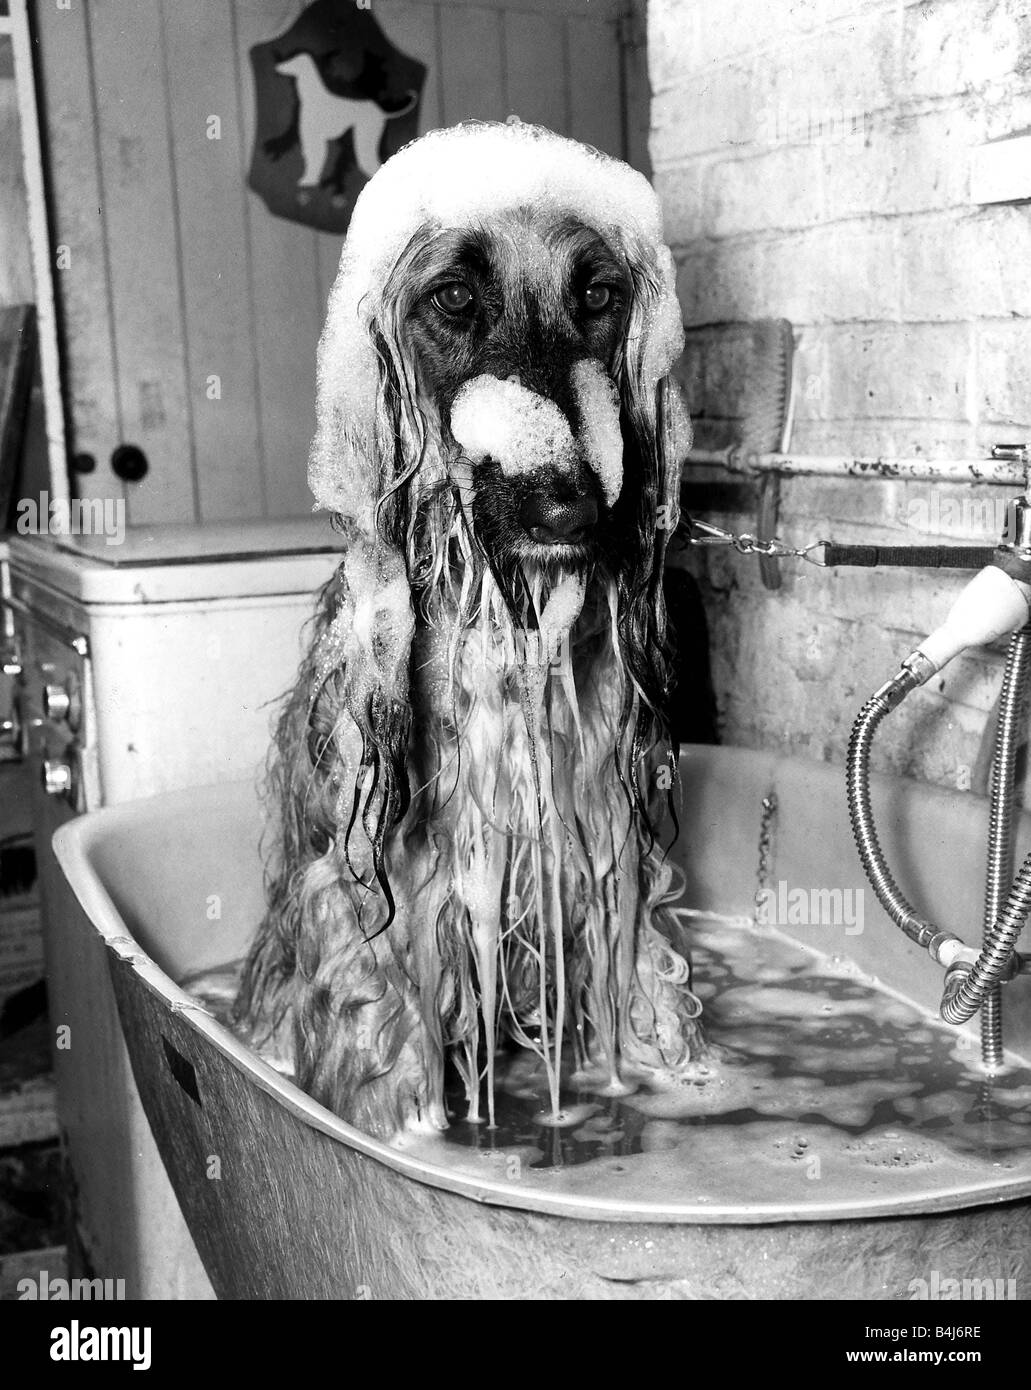 Animal Dogs Afghan Hound February 1979 Top Dog Khonistan Androcles of Alyshan is getting ready for an important appointment he will be competing at Crufts Show in London Afgan hound s owner Carole Walkeden of Watford ia making sure he ll look his best February 1979 Stock Photo